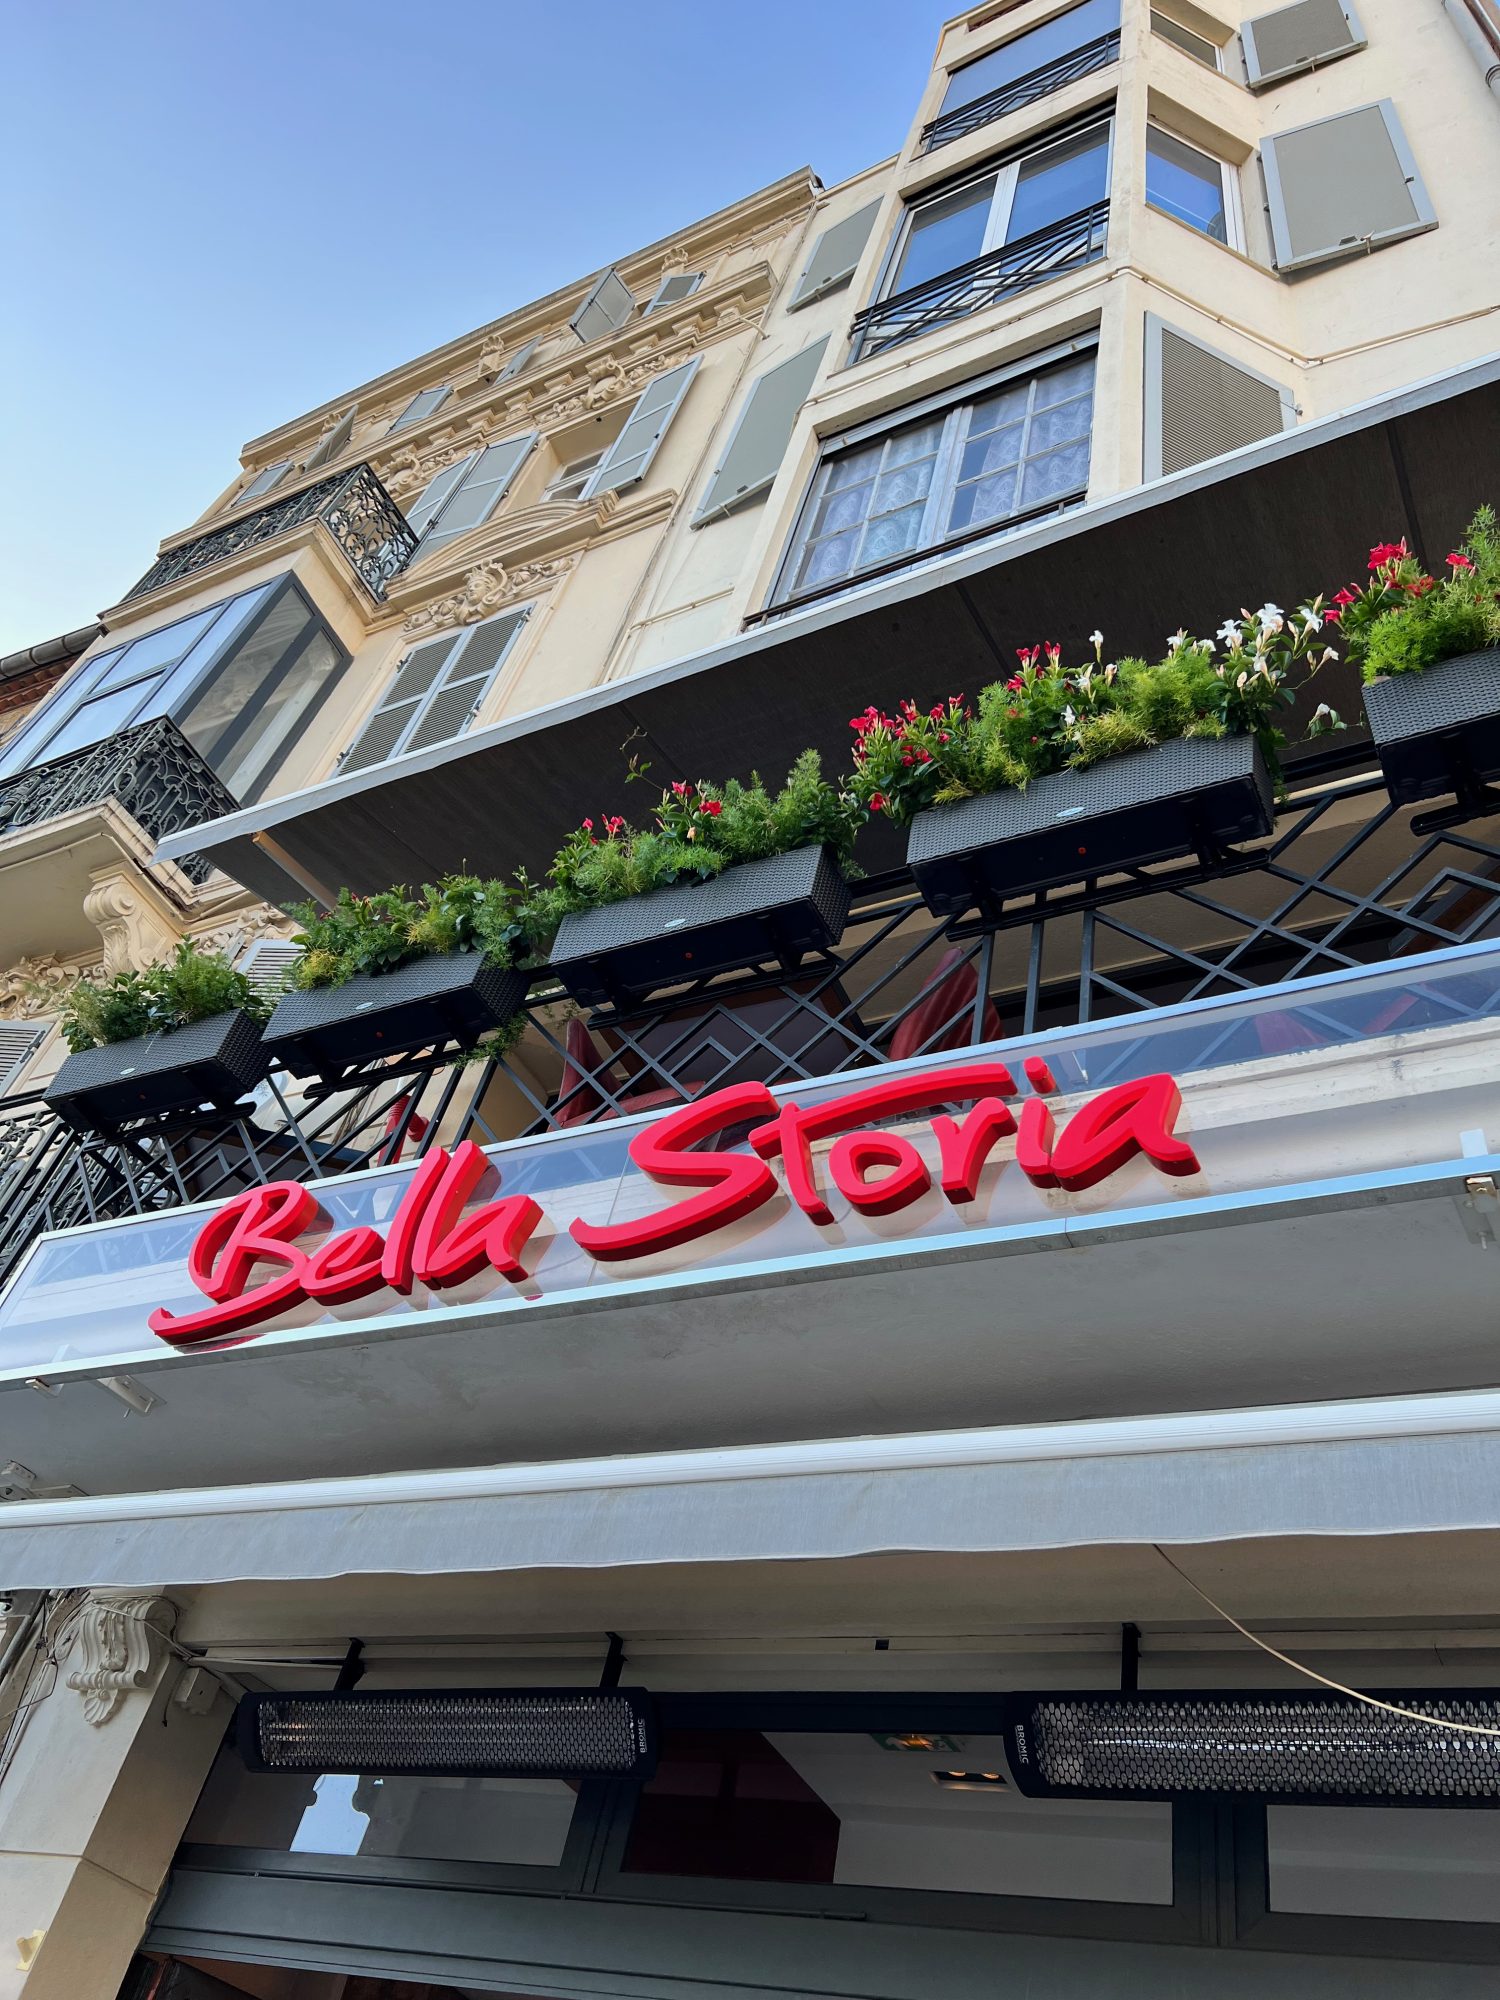 exterior of the Bella Storia restaurant in Cannes, France.